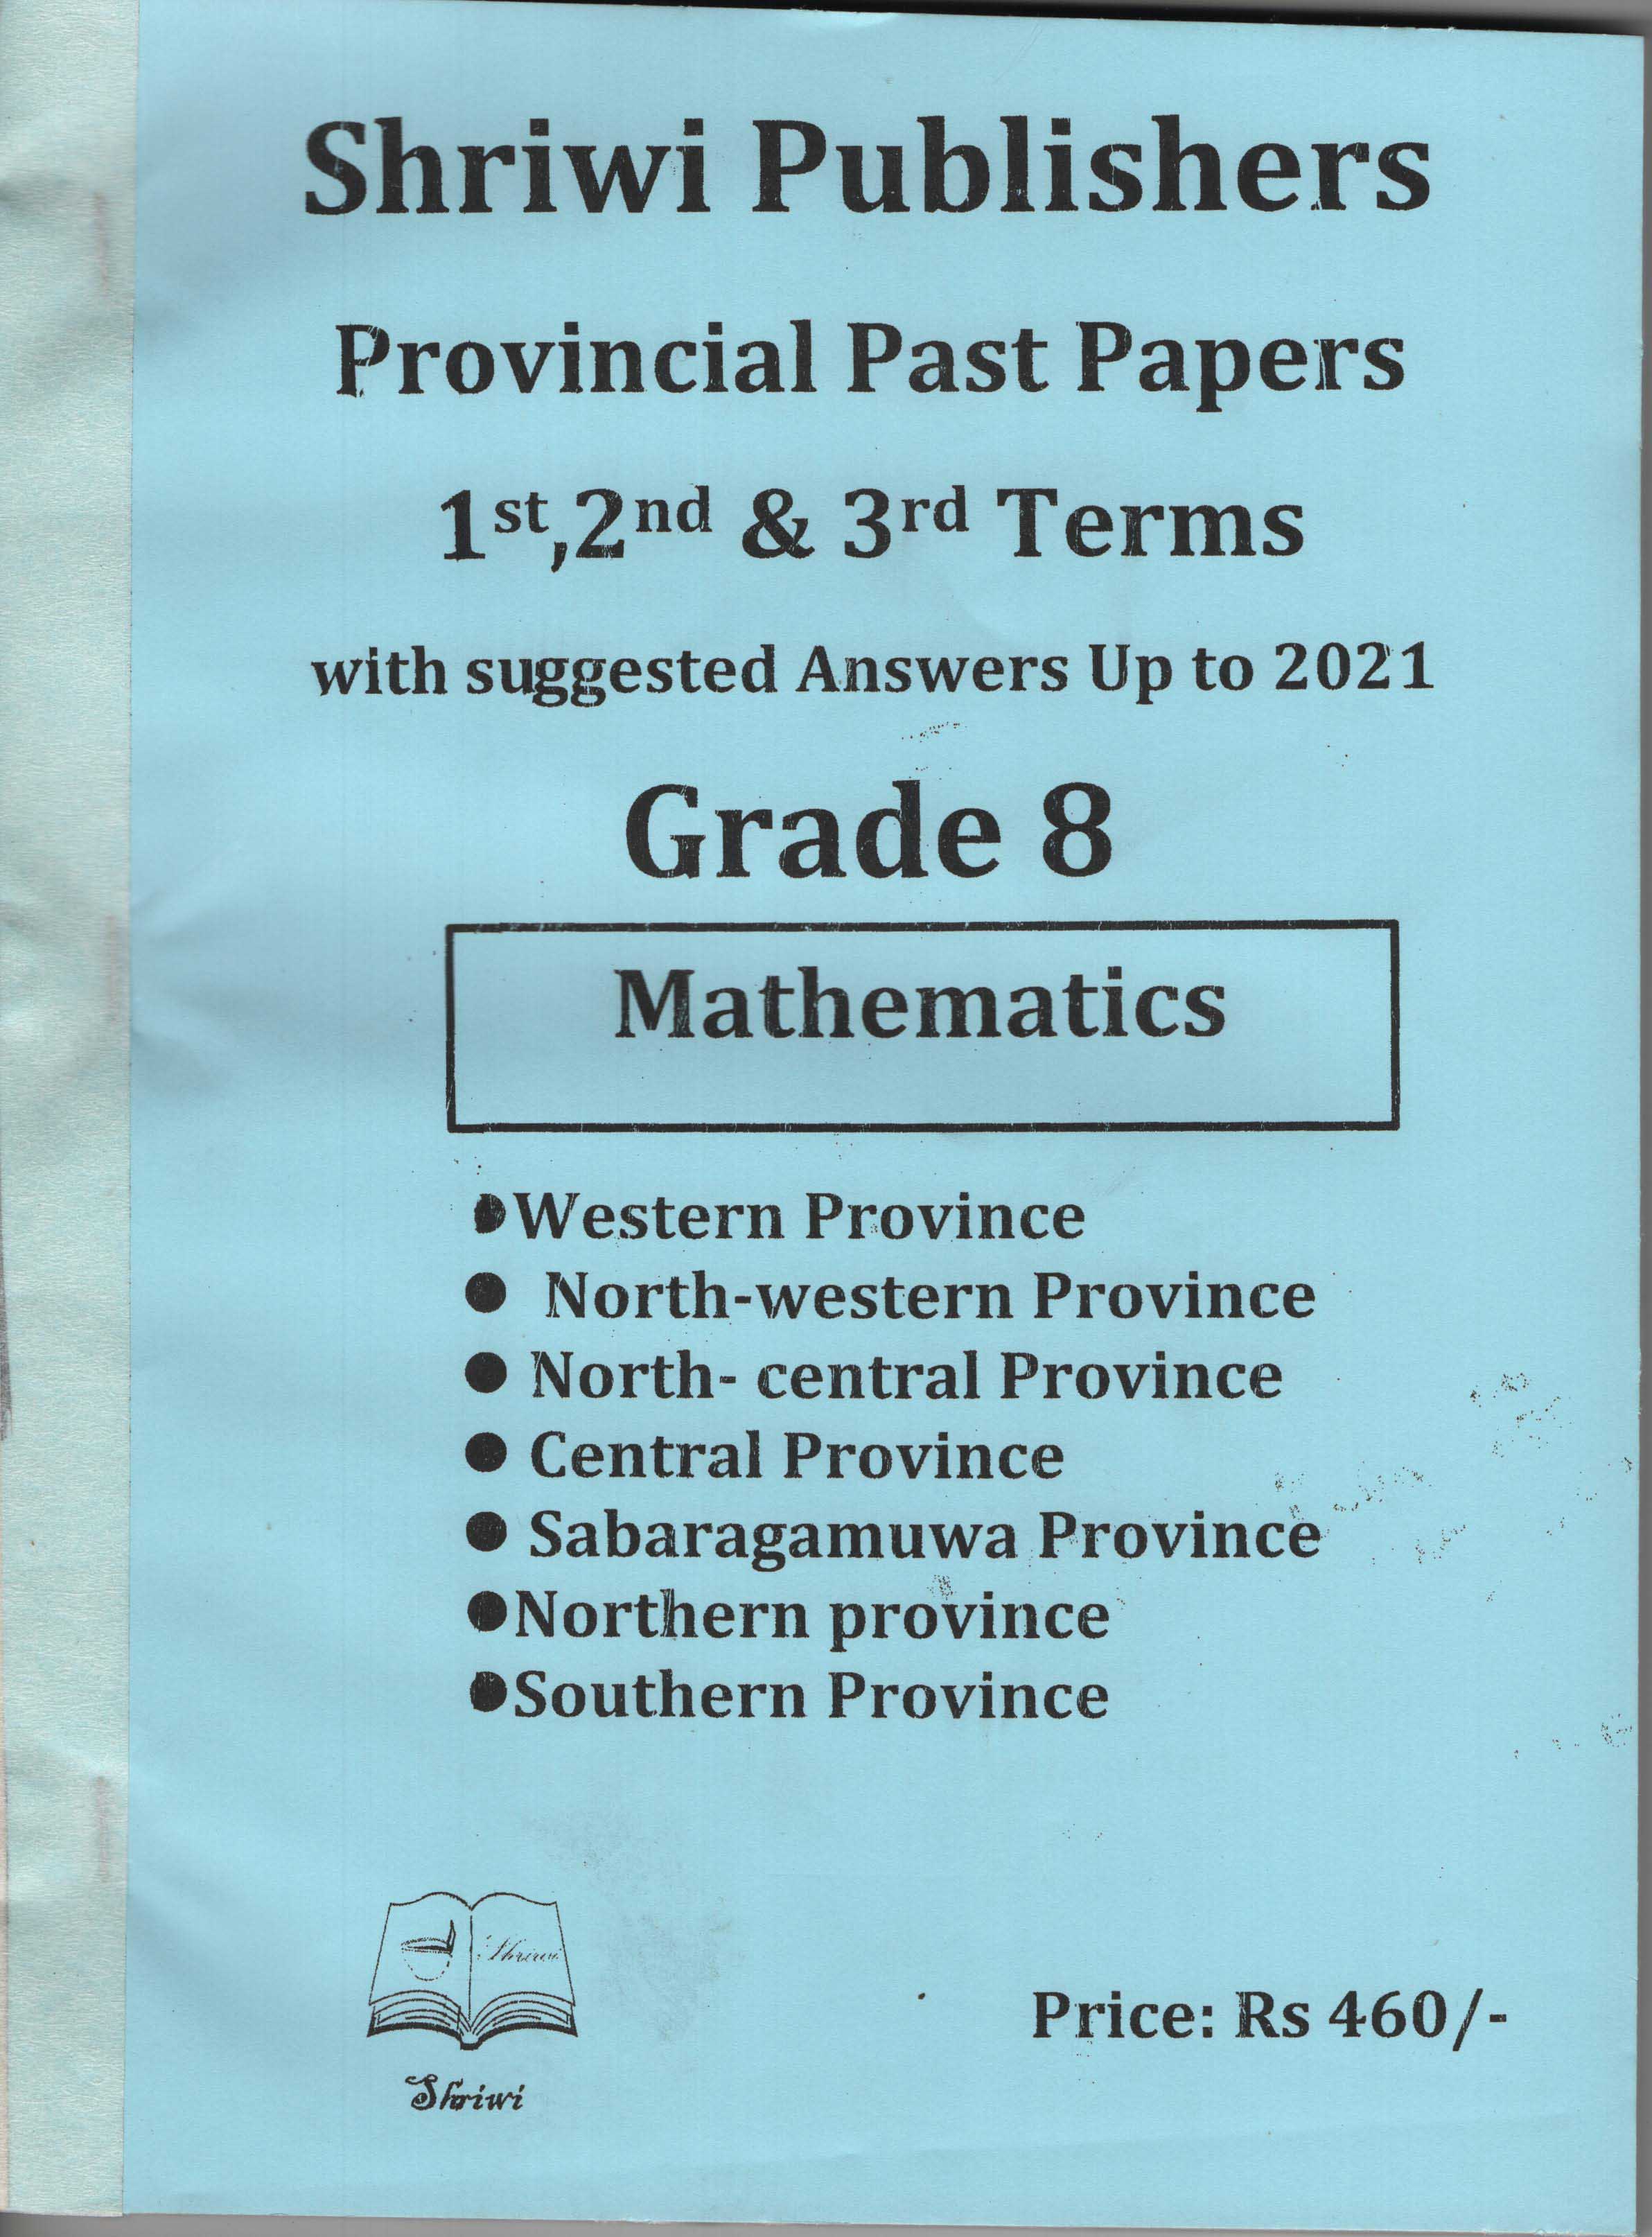 Shriwi Grade 8 Mathematics Provincial Past Papers  with Suggested Answers Up to2021 (Terms 1,2&3)